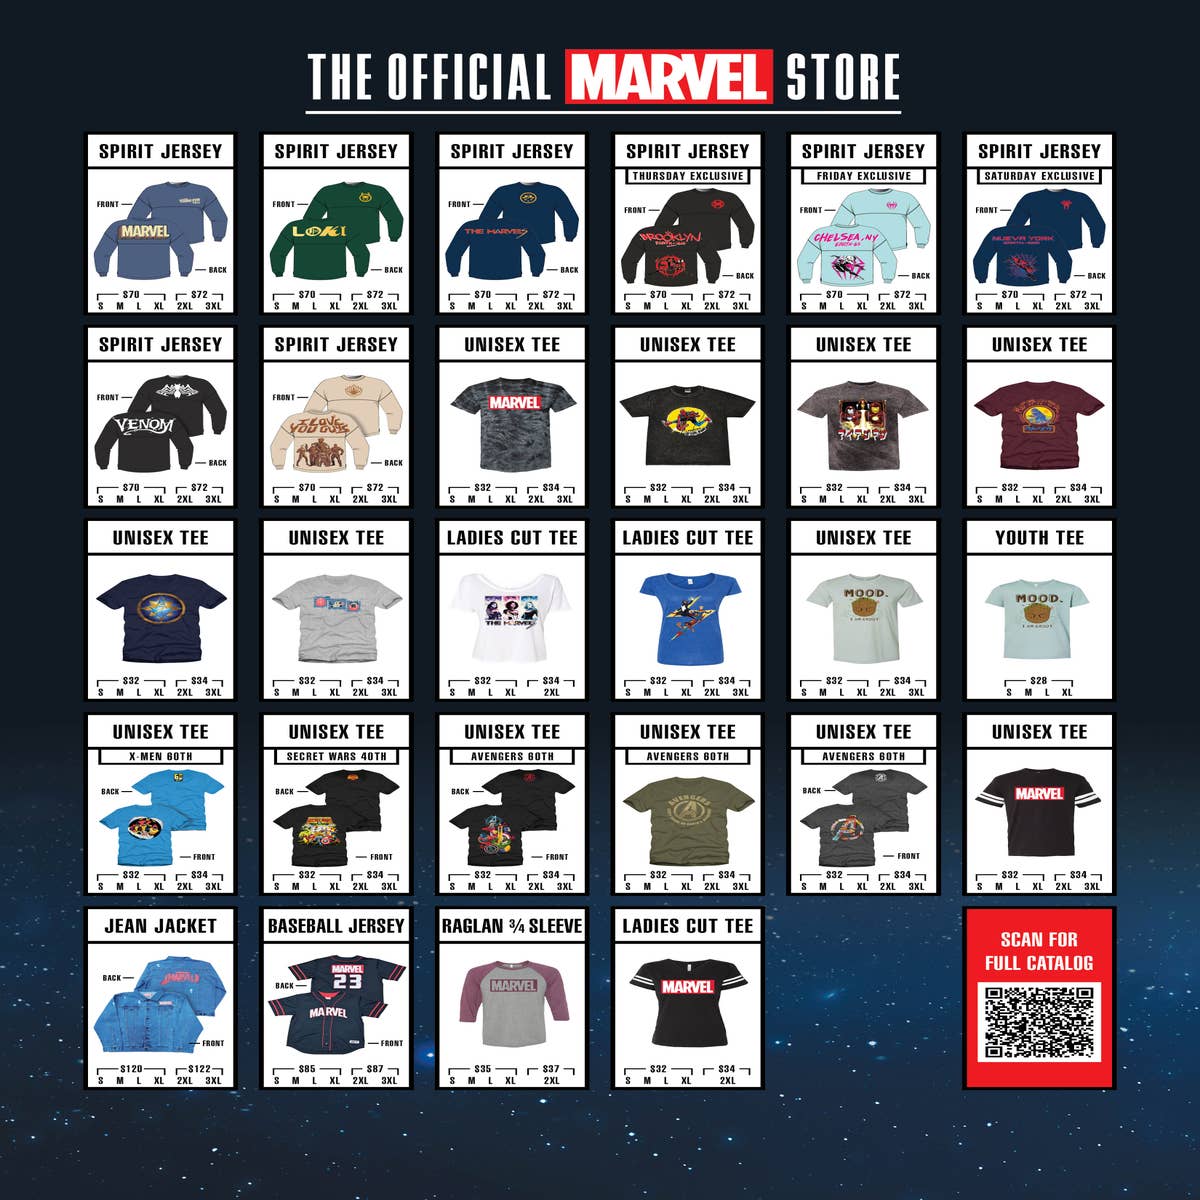 Marvel — New York Comic-Con 2023 Exclusives - VeVe Digital Collectibles